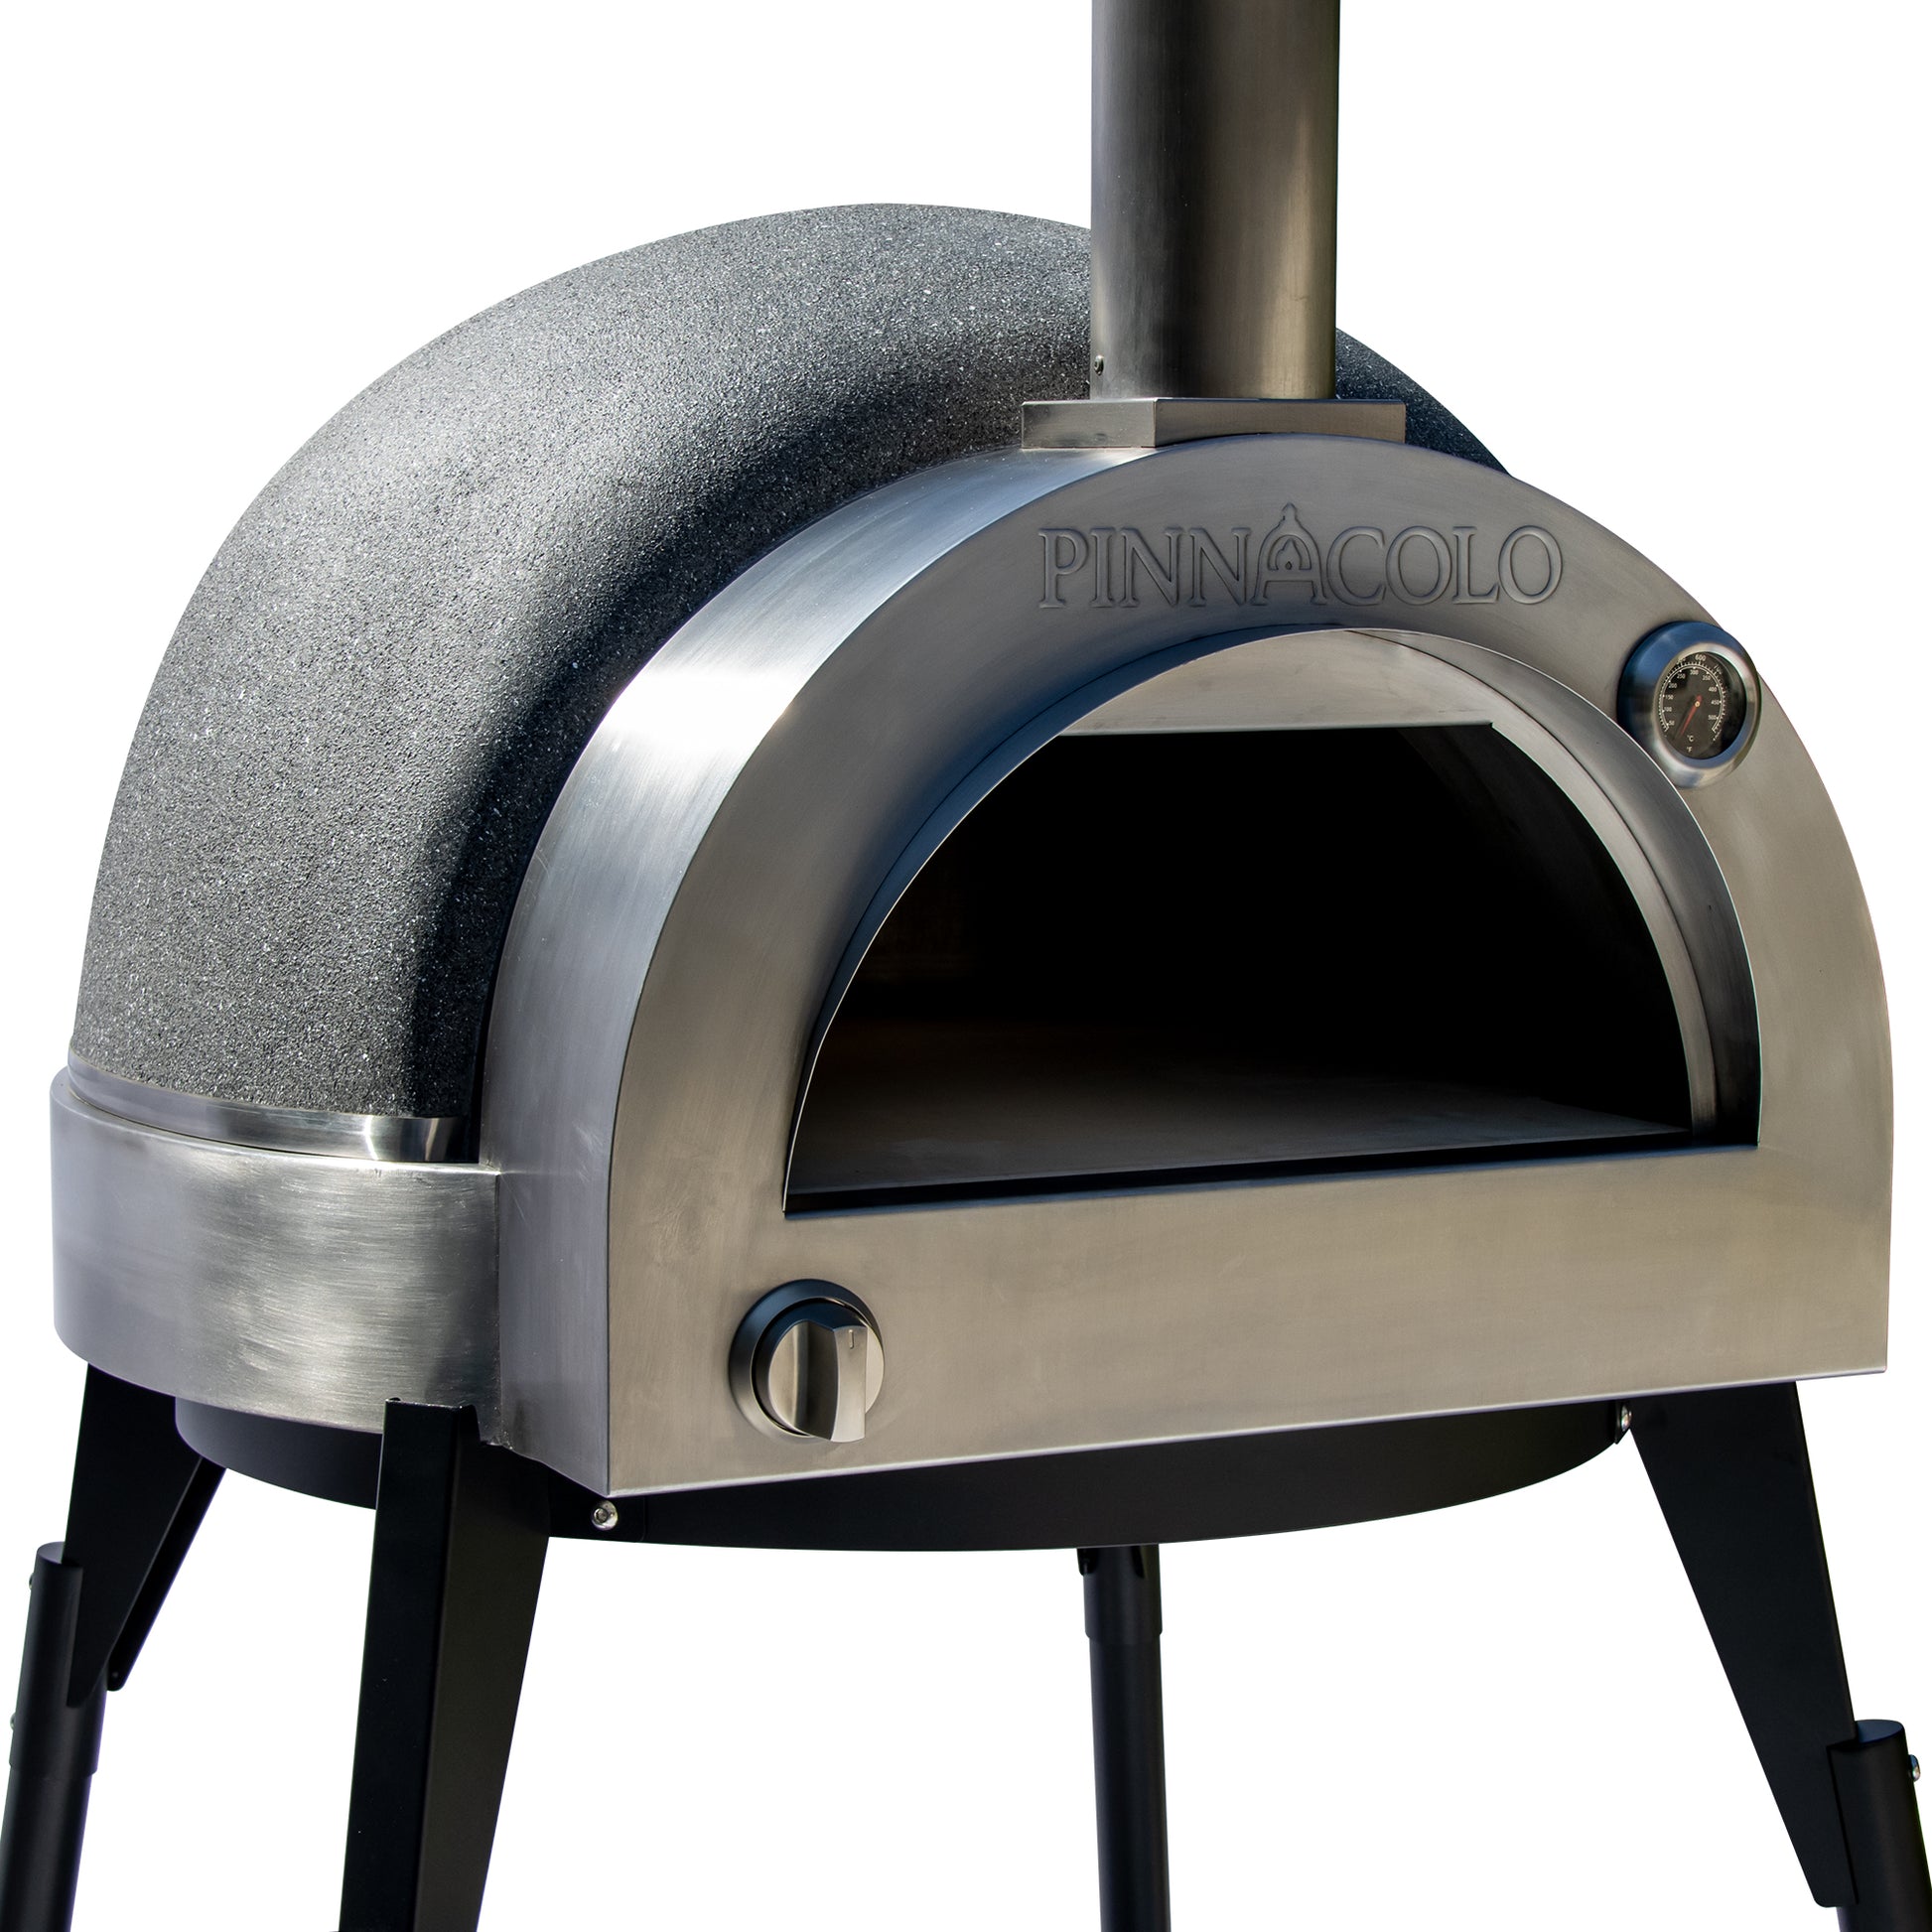 PINNACOLO | IBRIDO (HYBRID) Gas/Wood Pizza Oven With Accessories - PPO103 right side 